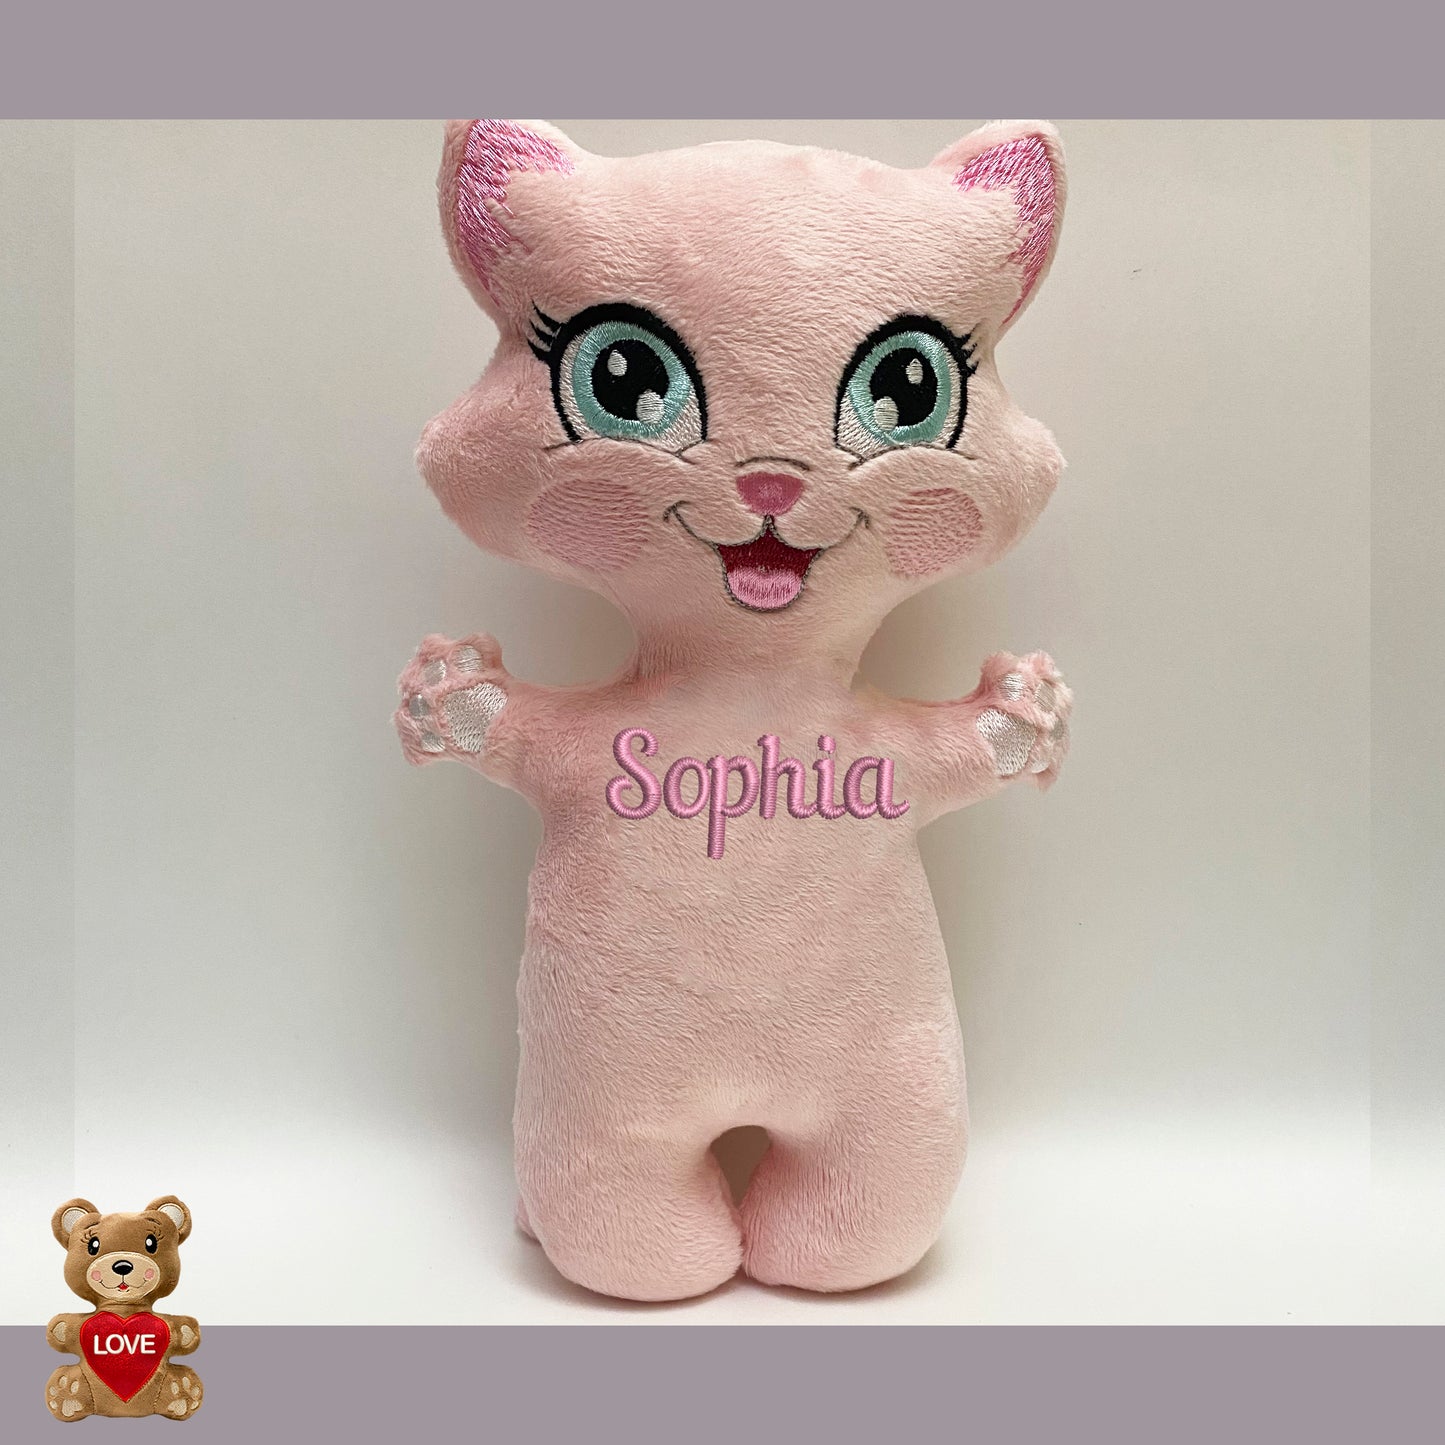 Personalised Cute Cat Stuffed toy ,Super cute personalised soft plush toy, Personalised Gift, Unique Personalized Birthday Gifts , Custom Gifts For Children